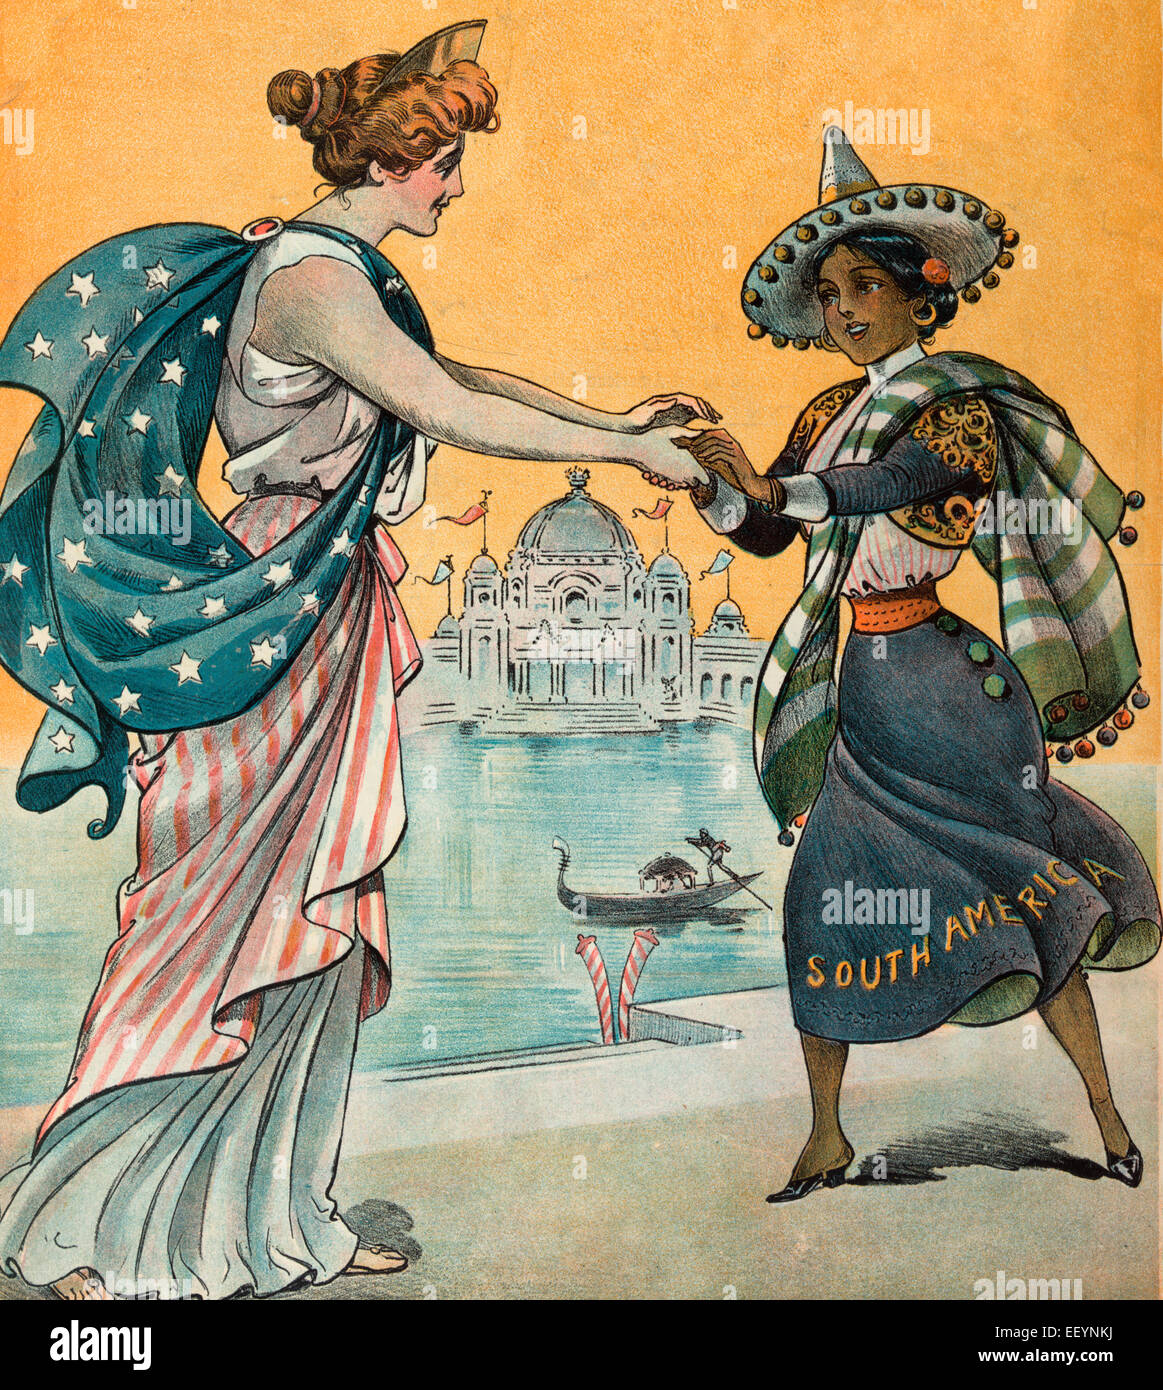 Pan-American Illustration shows Columbia welcoming a woman labeled 'South America' to the Pan-American Exposition in Buffalo, New York. 1901 Stock Photo